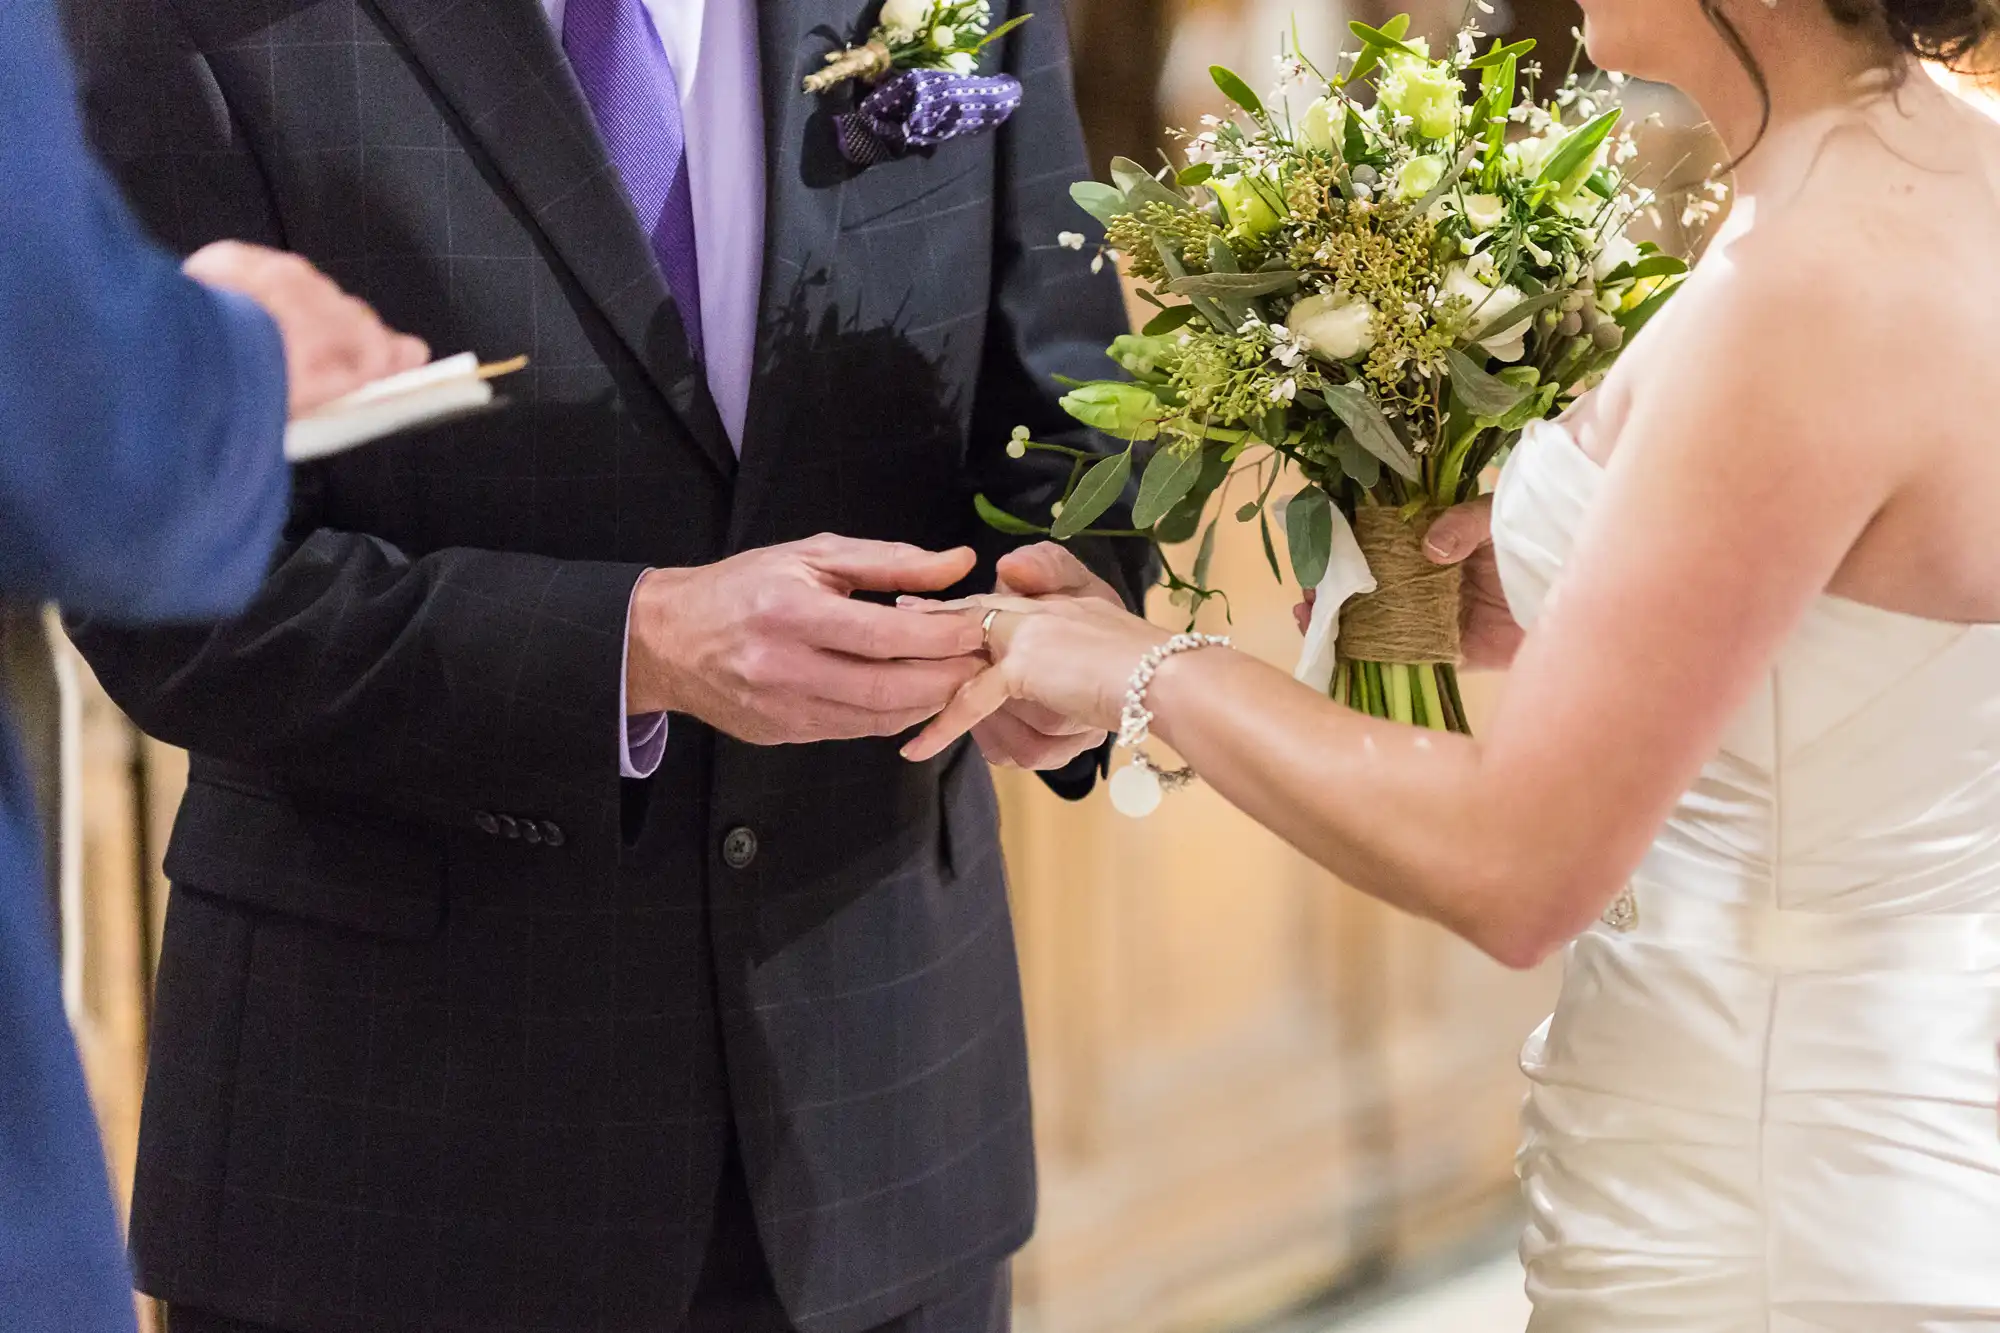 A bride and groom exchange rings during a wedding ceremony, with the groom wearing a purple tie and the bride holding a bouquet.